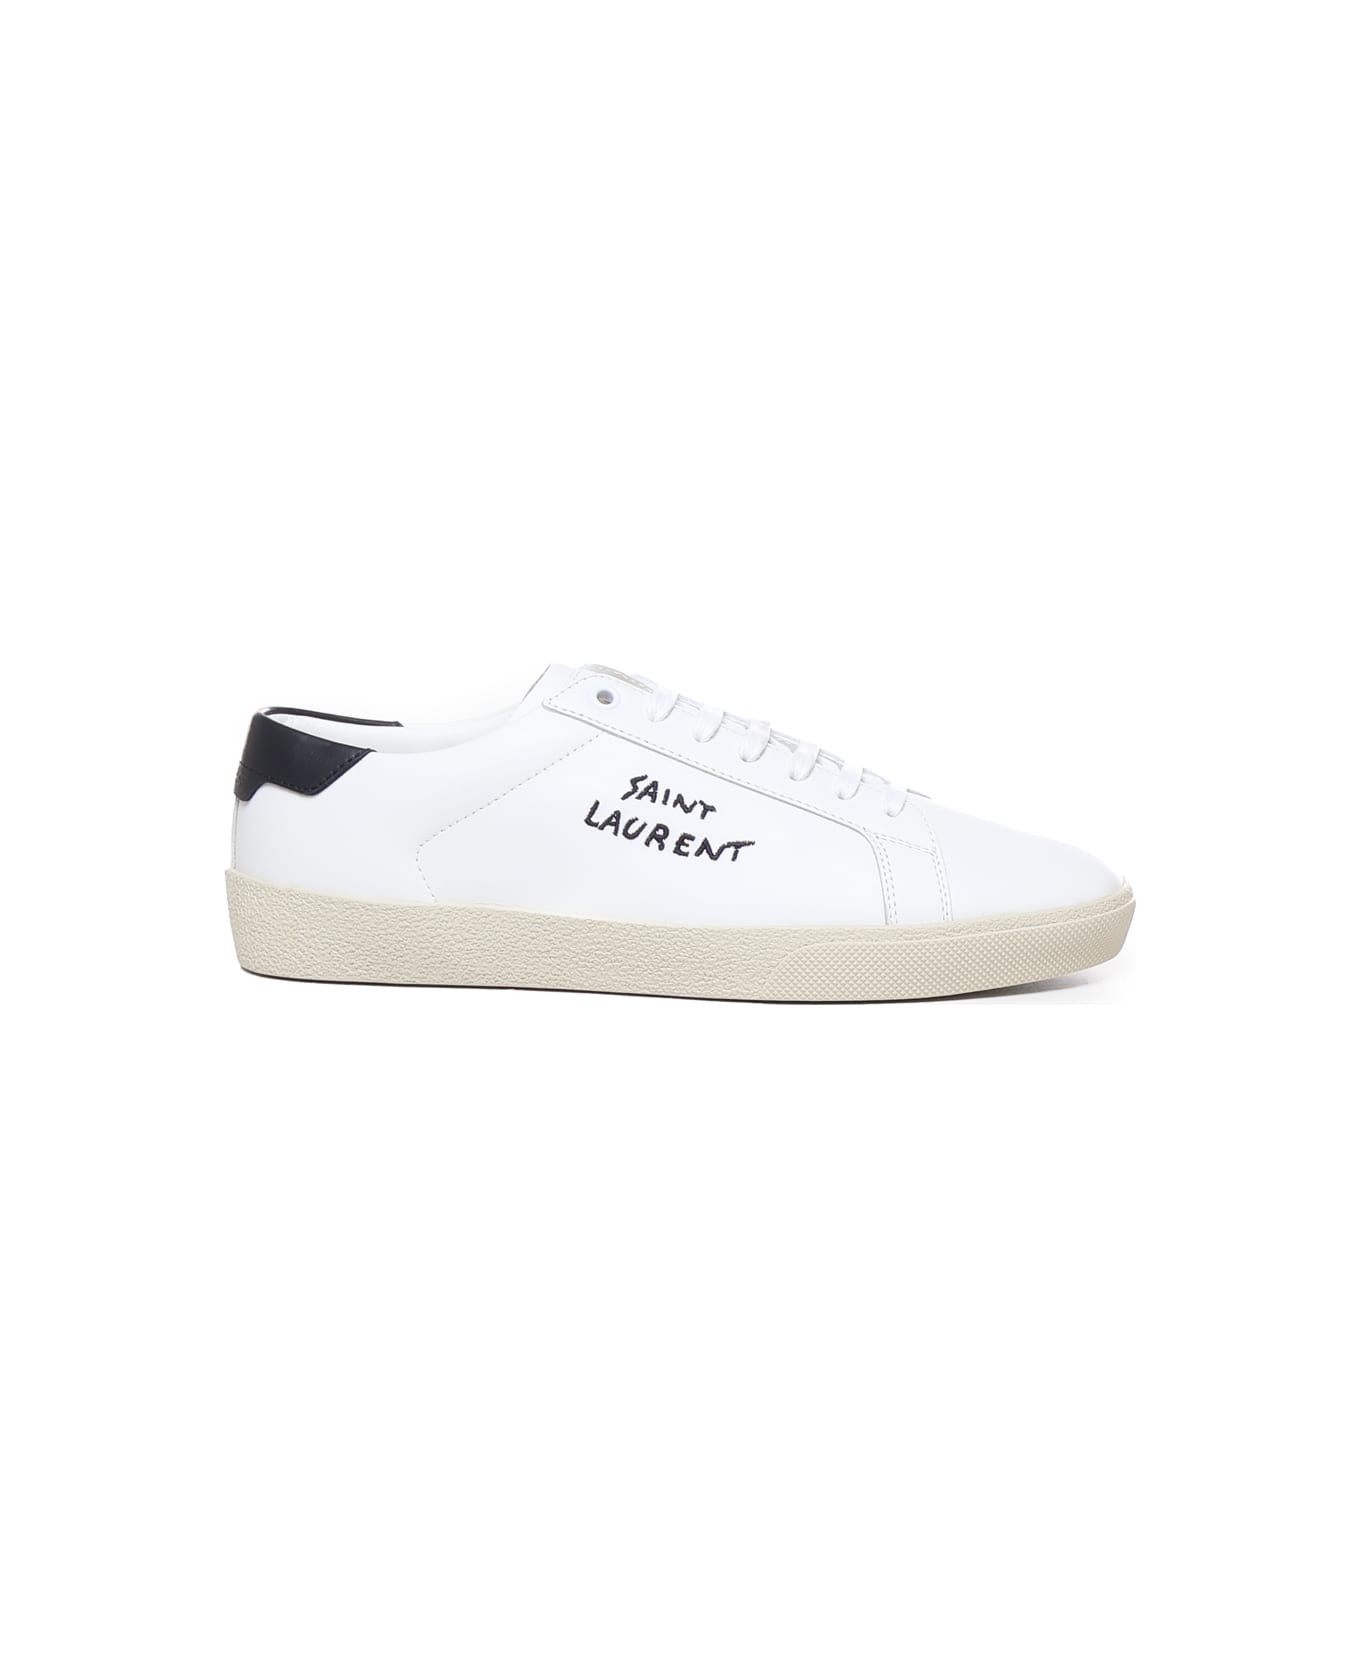 Saint Laurent Sneakers With Embroidery - White/black